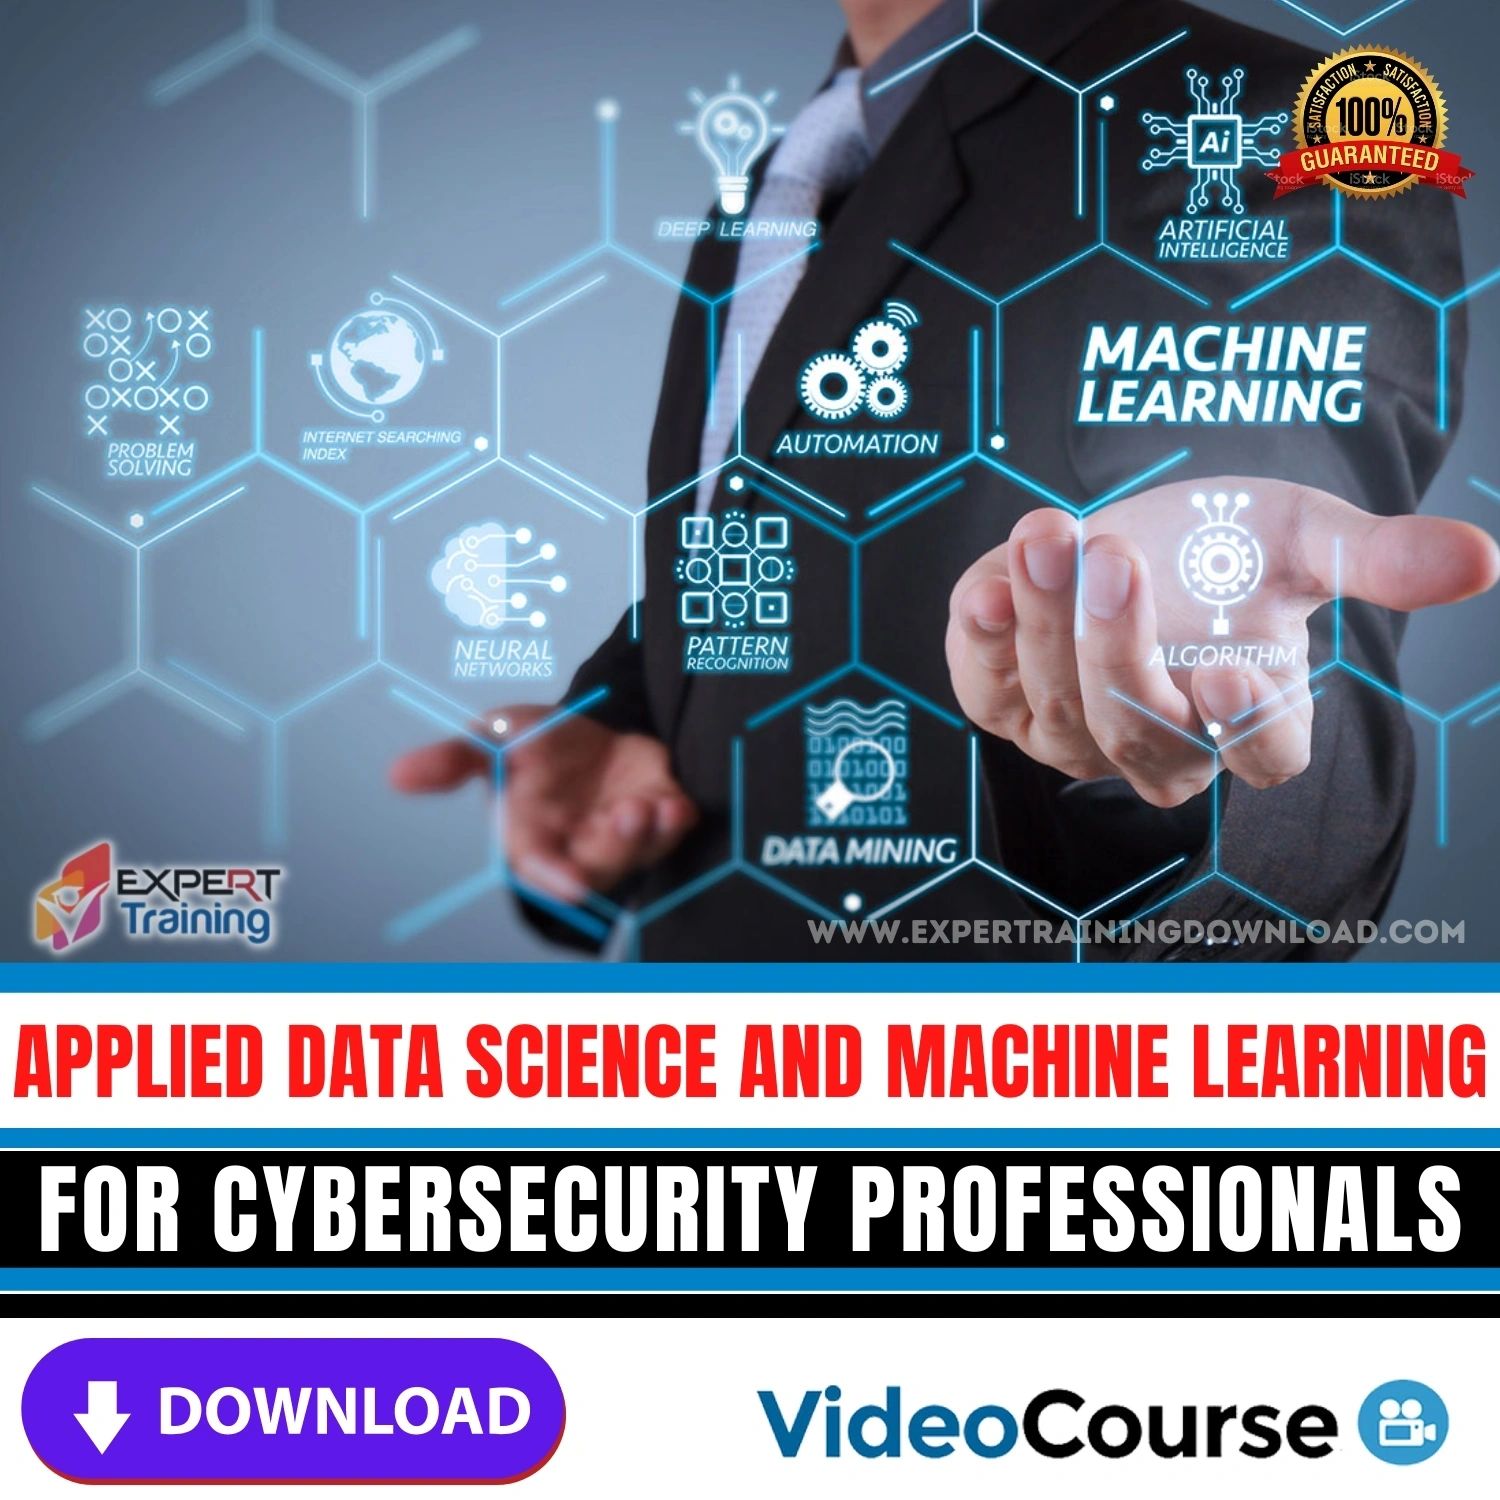 Applied Data Science and Machine Learning for Cybersecurity Professionals